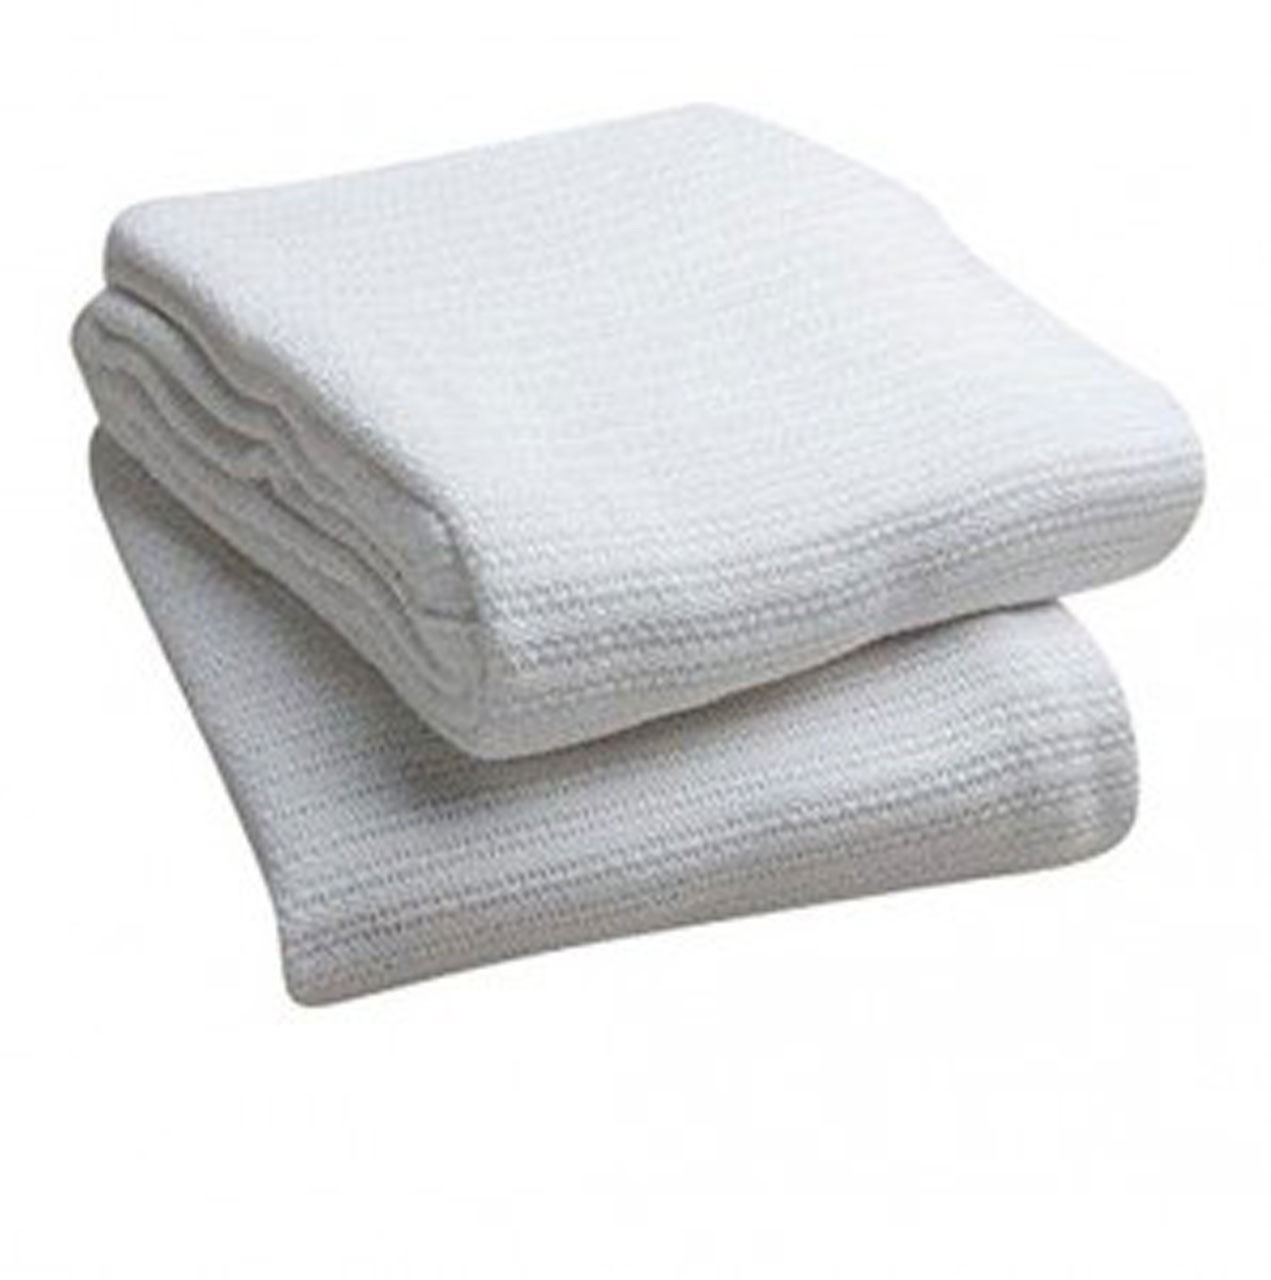 Open Weave Thermal Blanket, White Questions & Answers